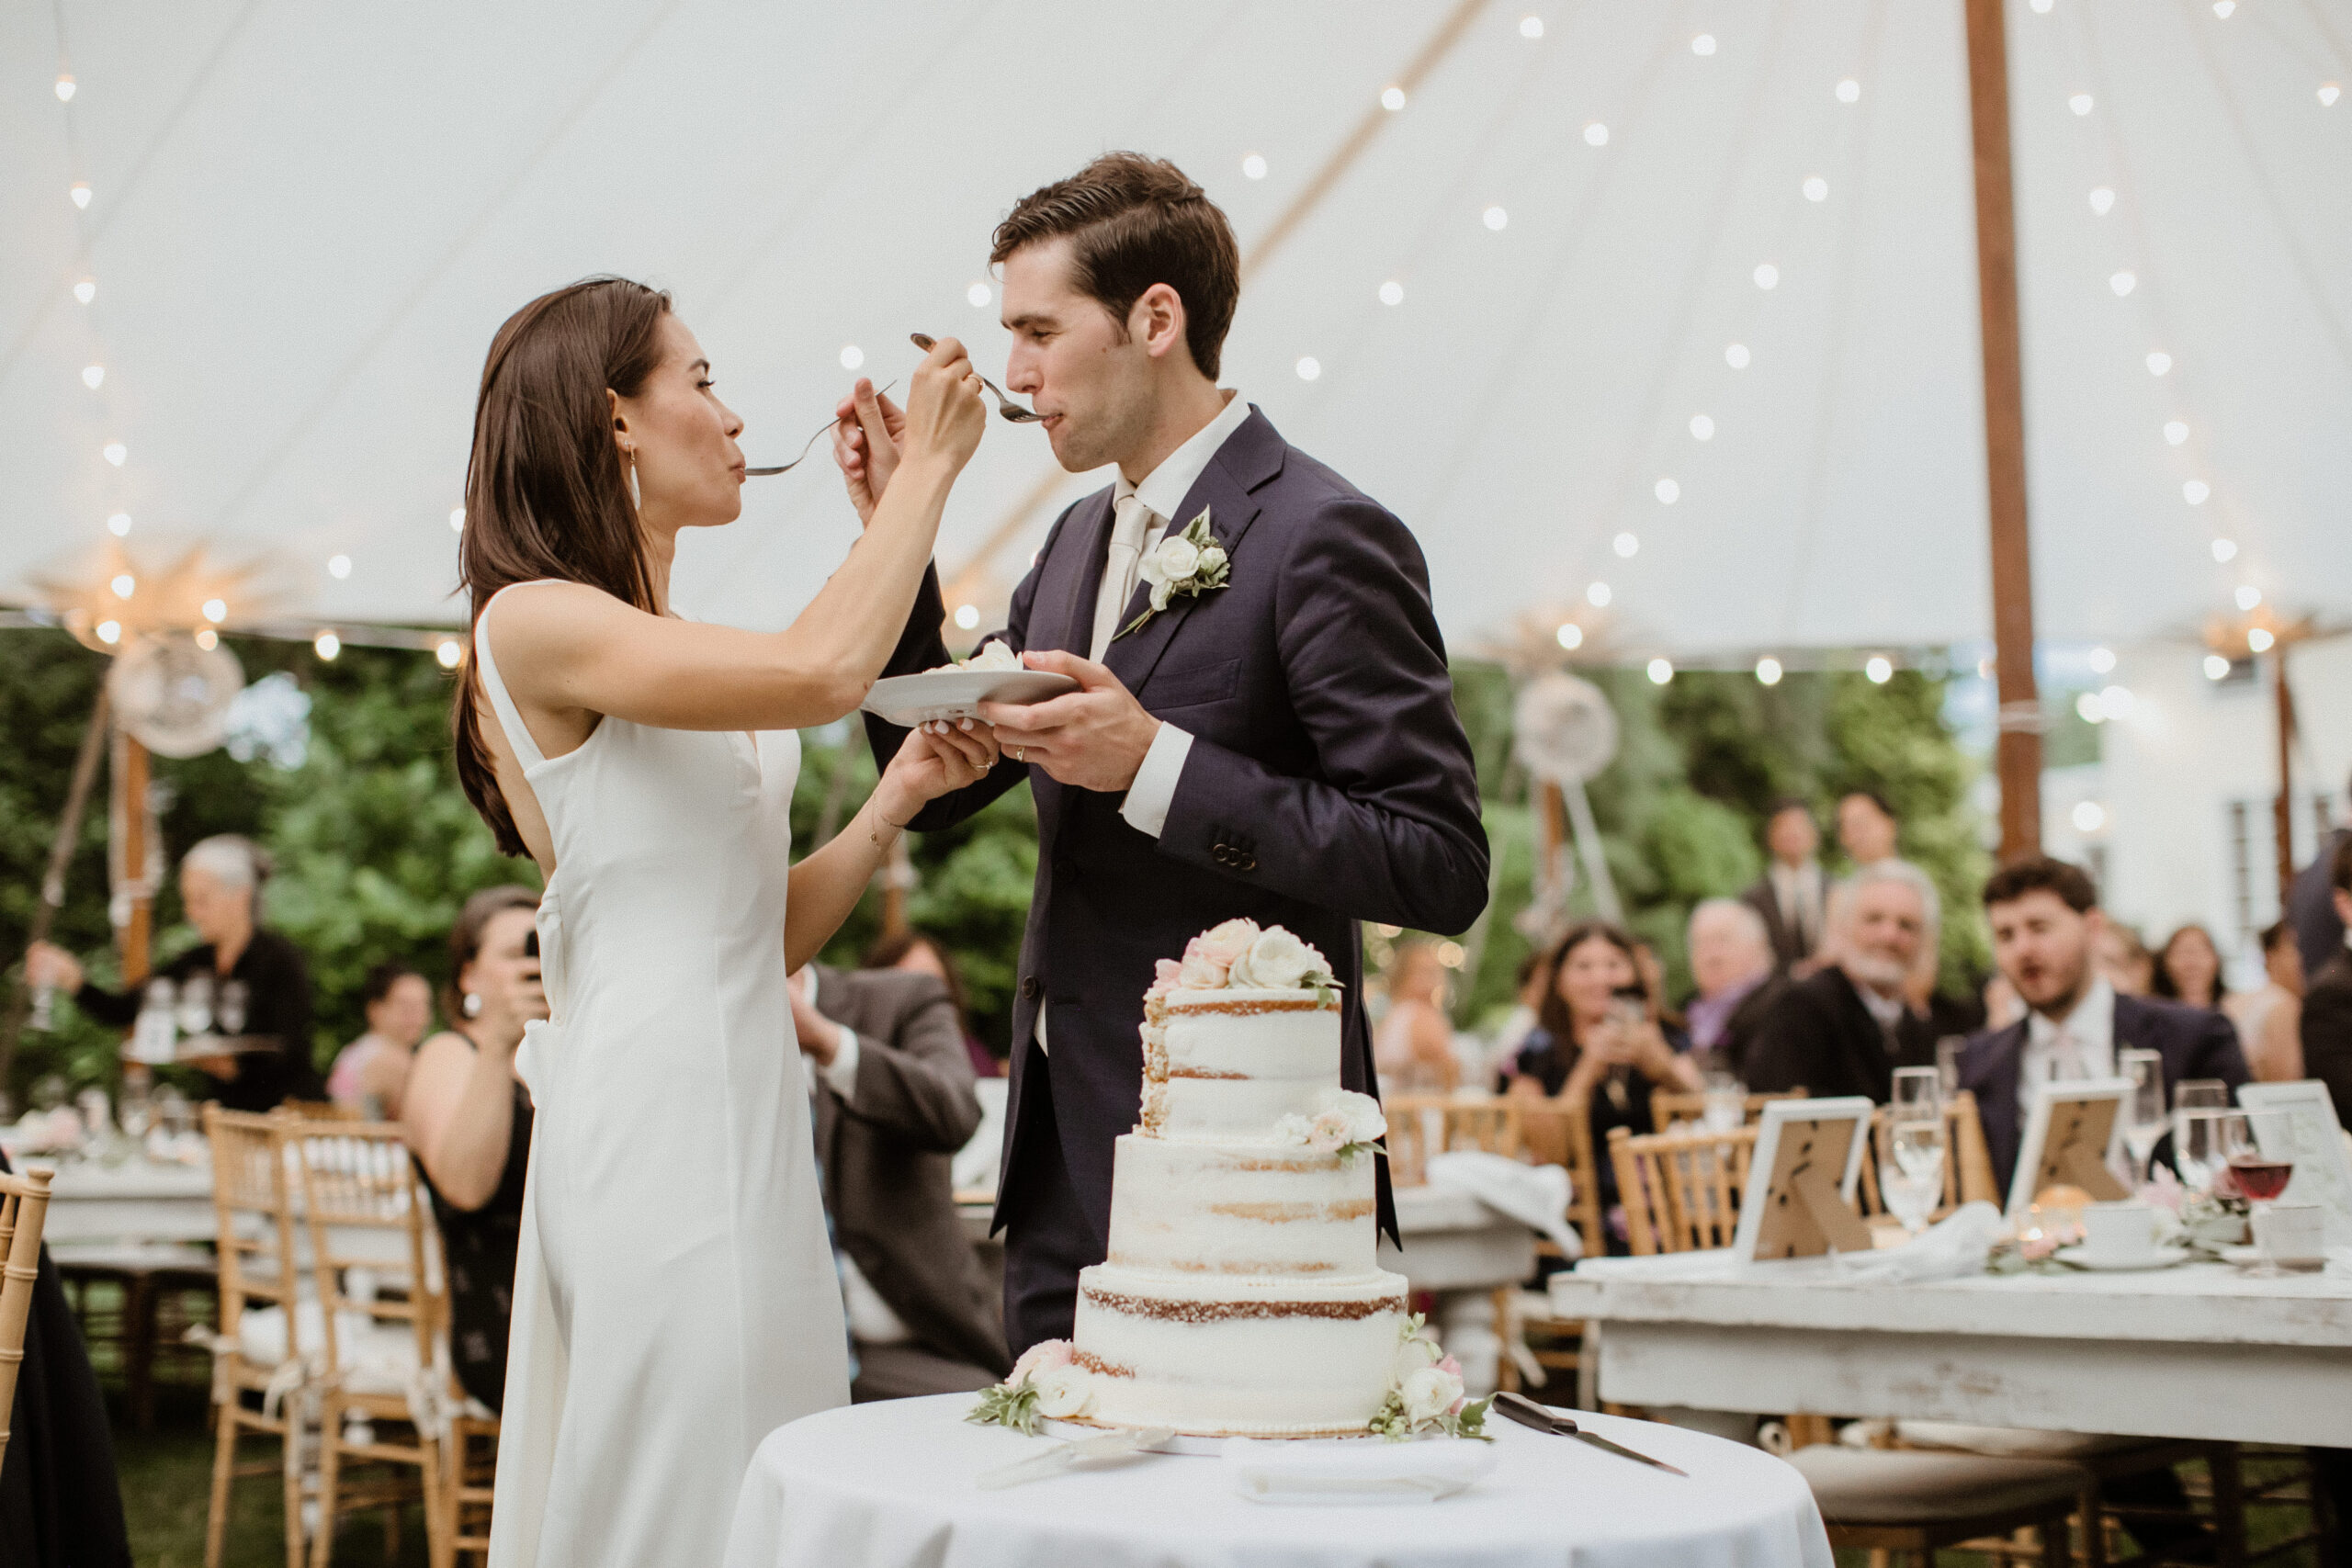 Stunning bride and groom feed each other cake during their stunning Long Island Wedding